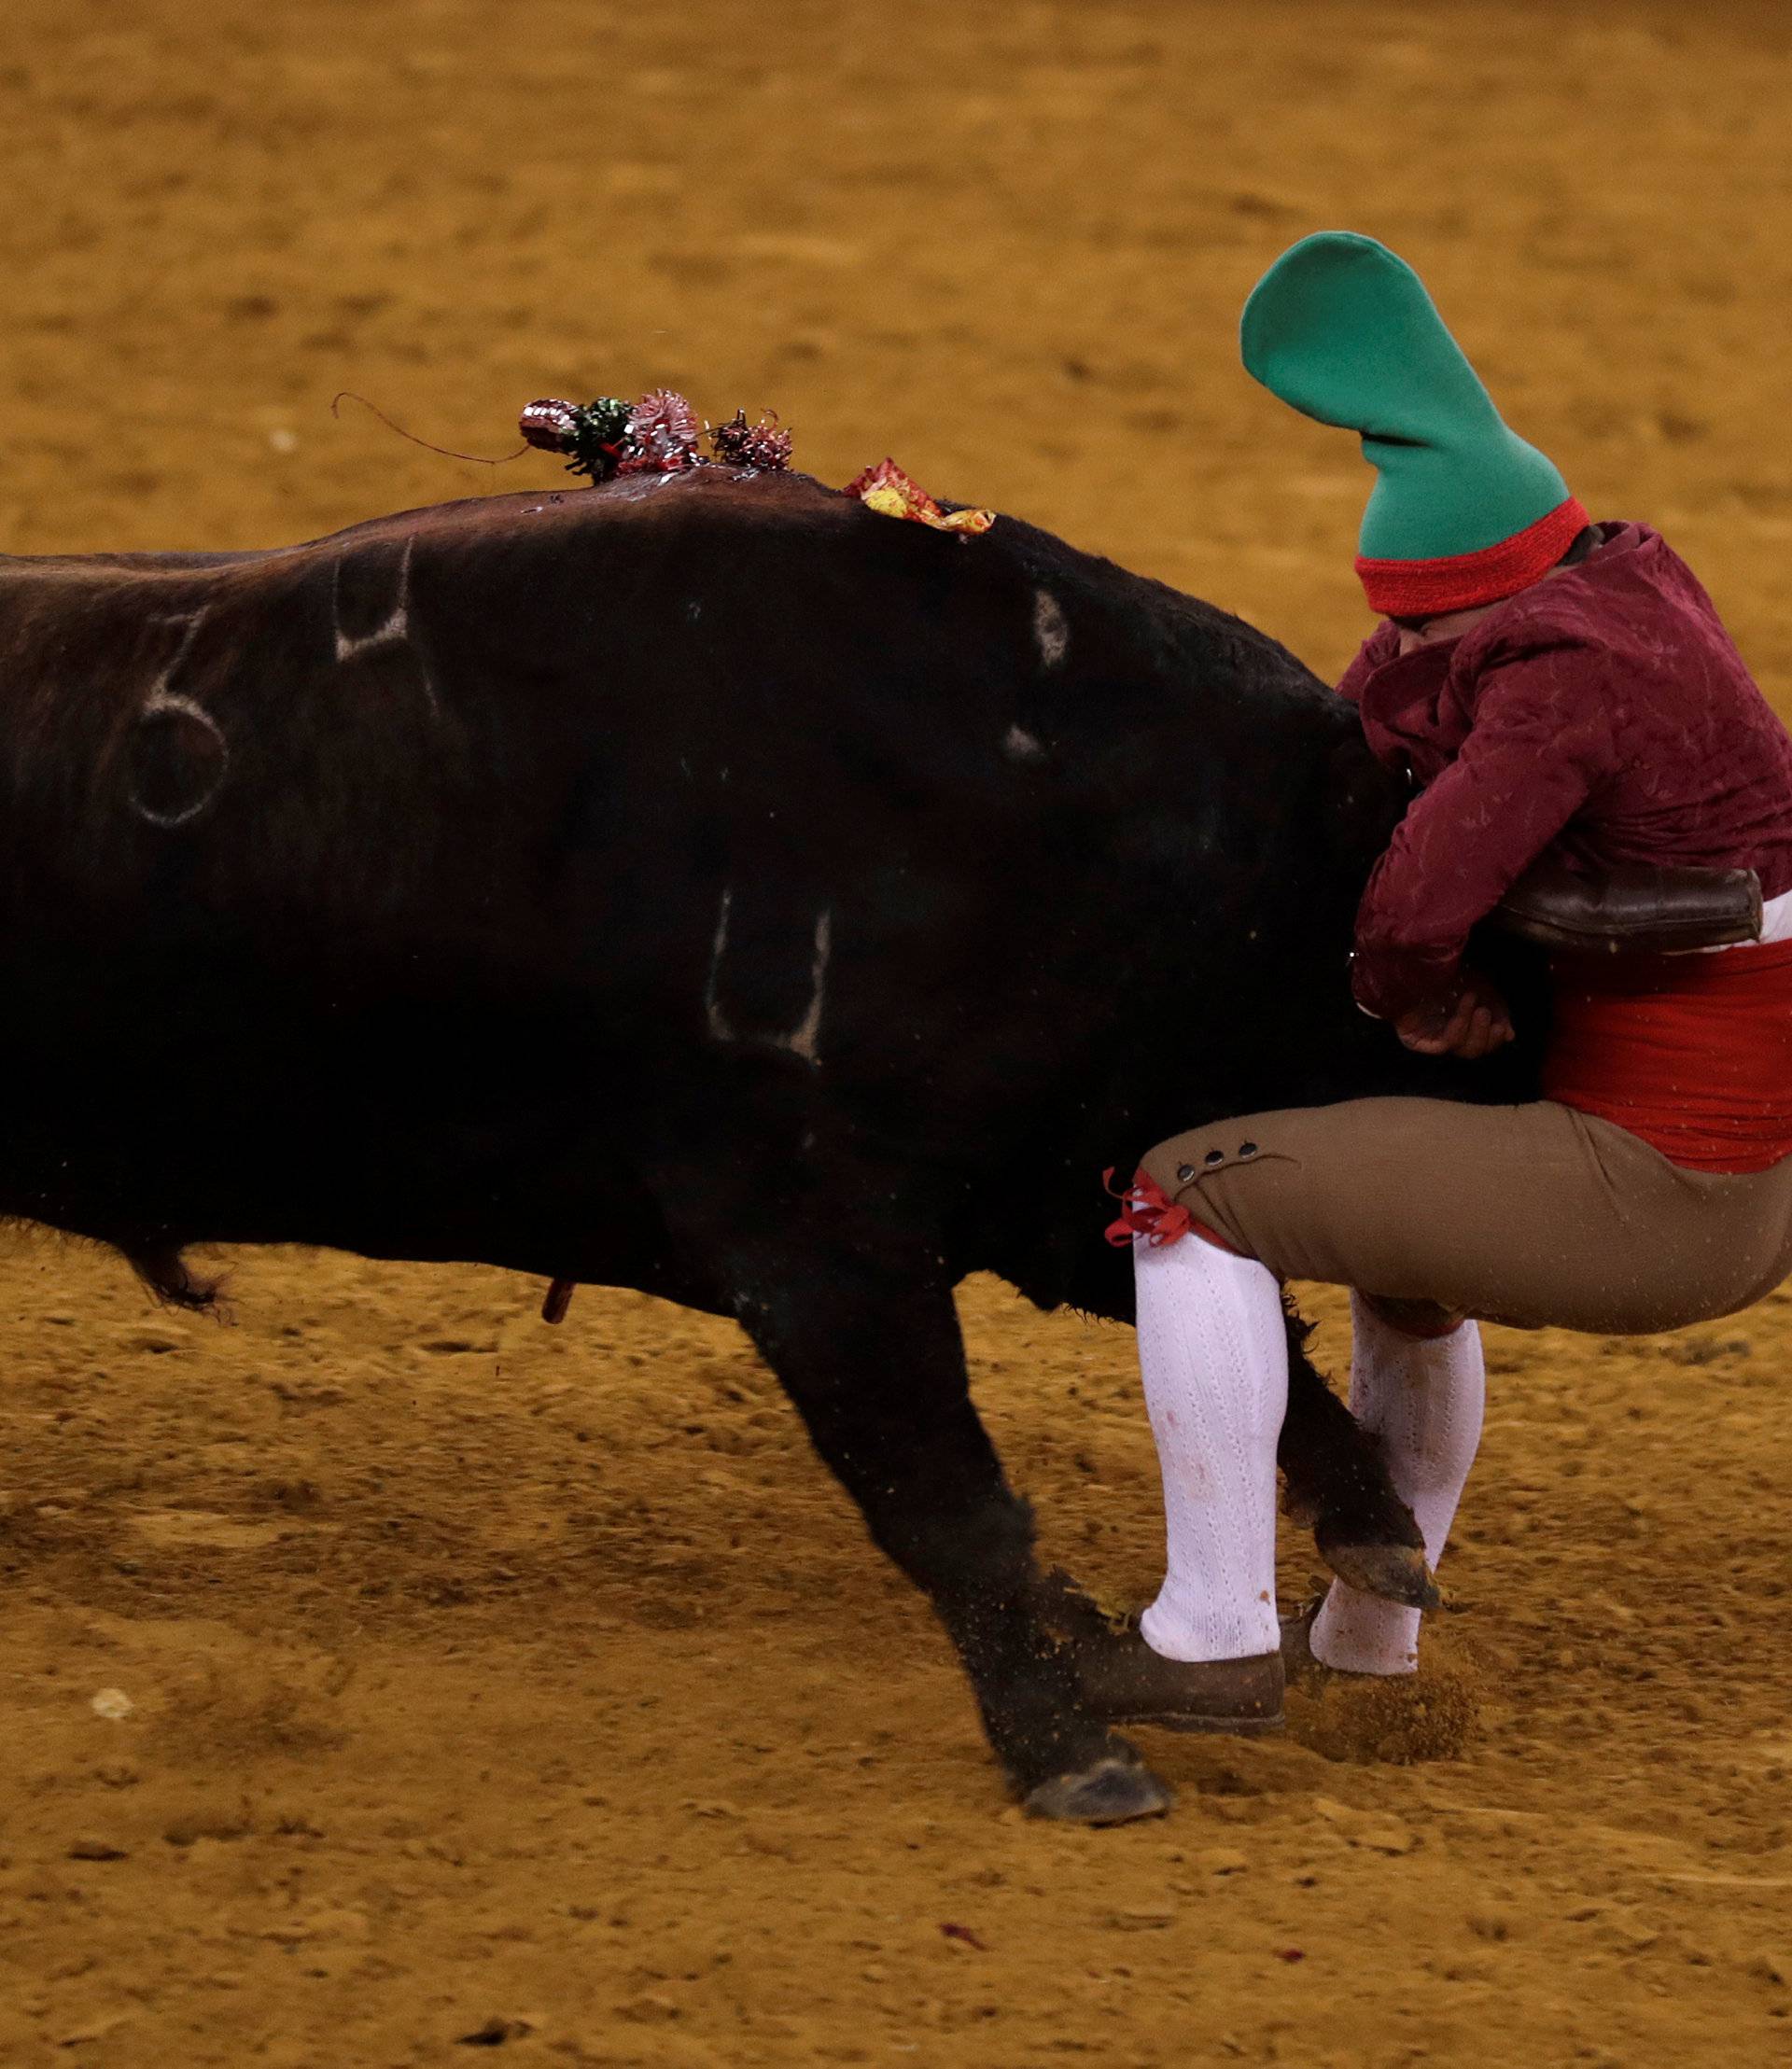 Members of Montemor forcados group perform during a bullfight at Campo Pequeno bullring in Lisbon